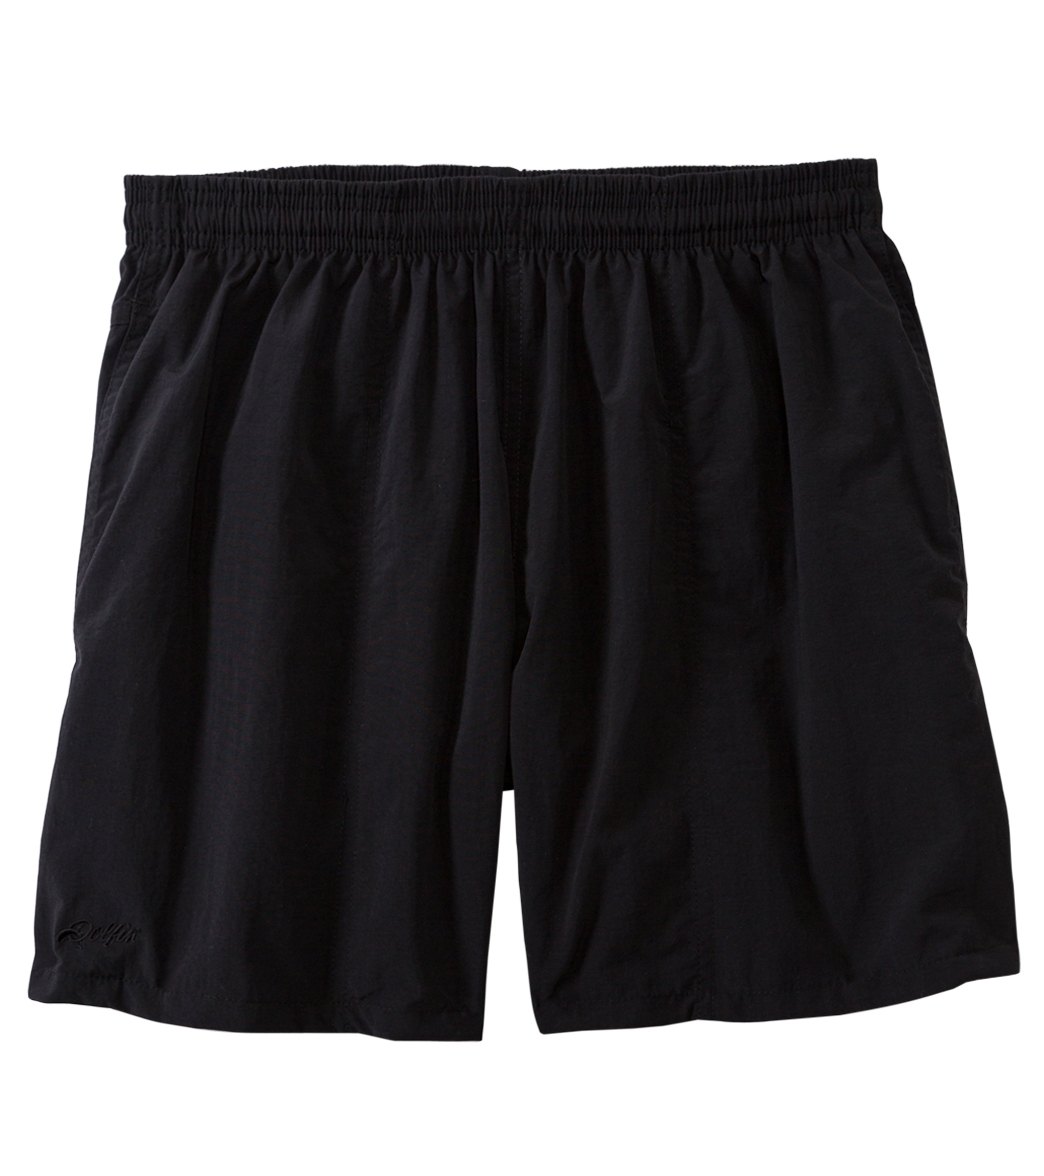 Dolfin Male Water Shorts at SwimOutlet.com